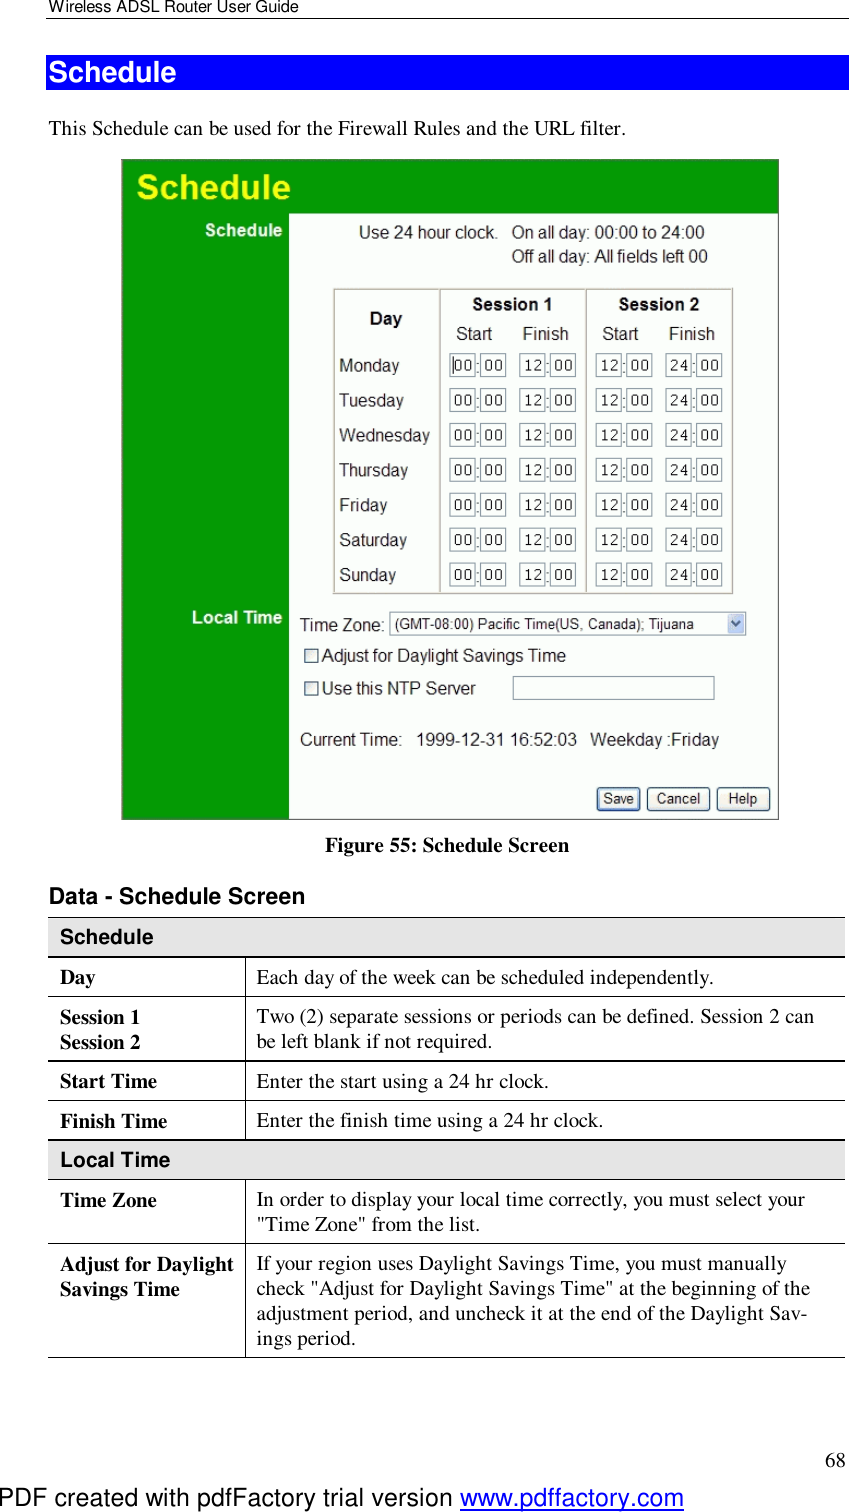 Wireless ADSL Router User Guide 68 Schedule This Schedule can be used for the Firewall Rules and the URL filter.    Figure 55: Schedule Screen Data - Schedule Screen Schedule Day  Each day of the week can be scheduled independently. Session 1 Session 2  Two (2) separate sessions or periods can be defined. Session 2 can be left blank if not required. Start Time  Enter the start using a 24 hr clock. Finish Time  Enter the finish time using a 24 hr clock. Local Time Time Zone In order to display your local time correctly, you must select your &quot;Time Zone&quot; from the list. Adjust for Daylight Savings Time  If your region uses Daylight Savings Time, you must manually check &quot;Adjust for Daylight Savings Time&quot; at the beginning of the adjustment period, and uncheck it at the end of the Daylight Sav-ings period. PDF created with pdfFactory trial version www.pdffactory.com